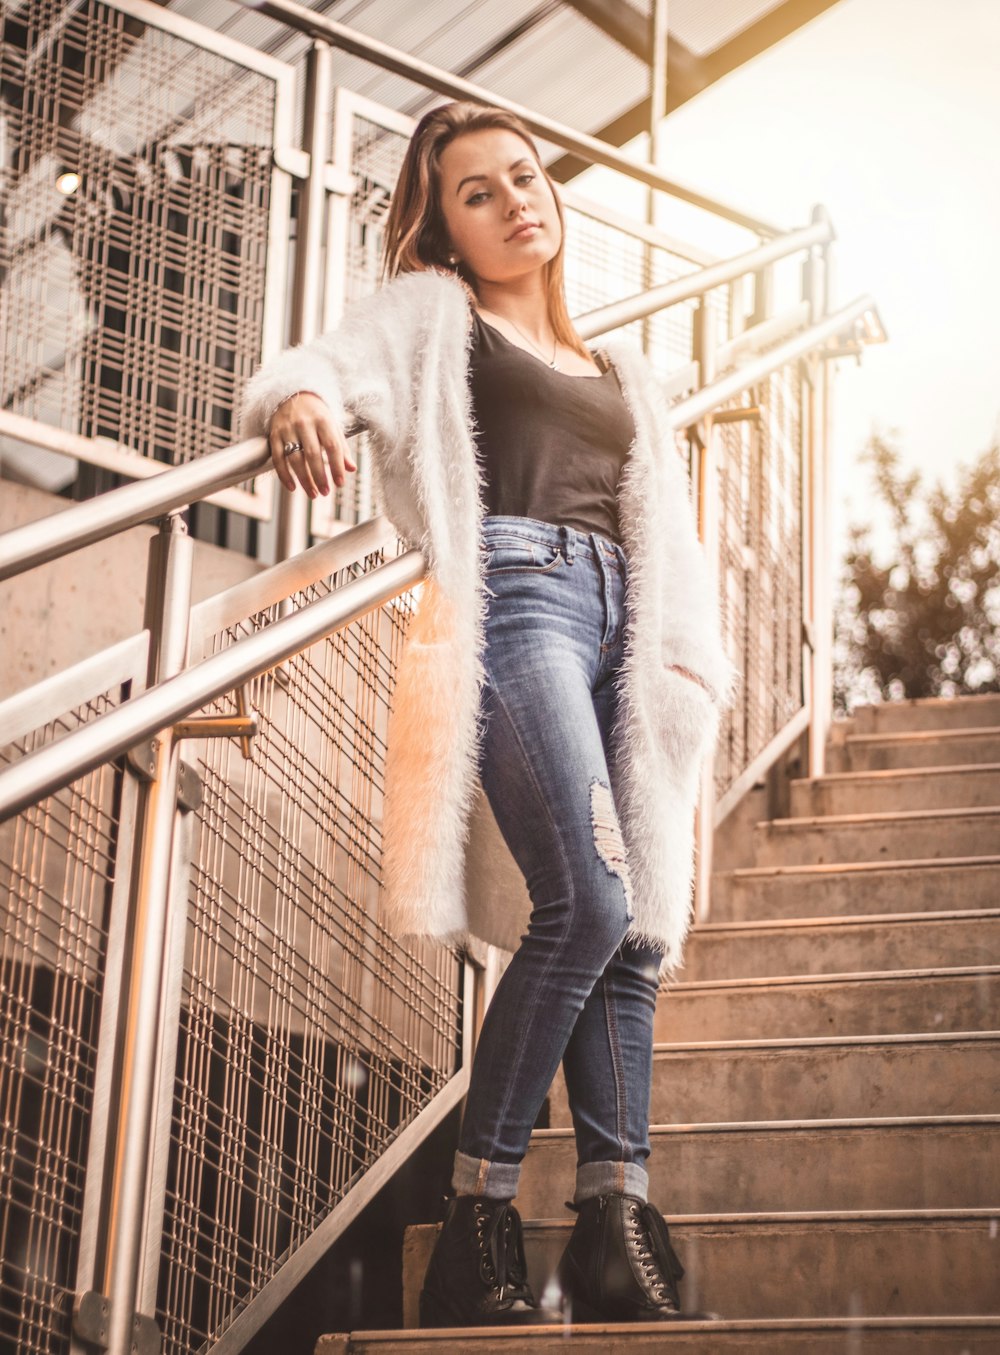 woman leaning on handrail while standing on stairs